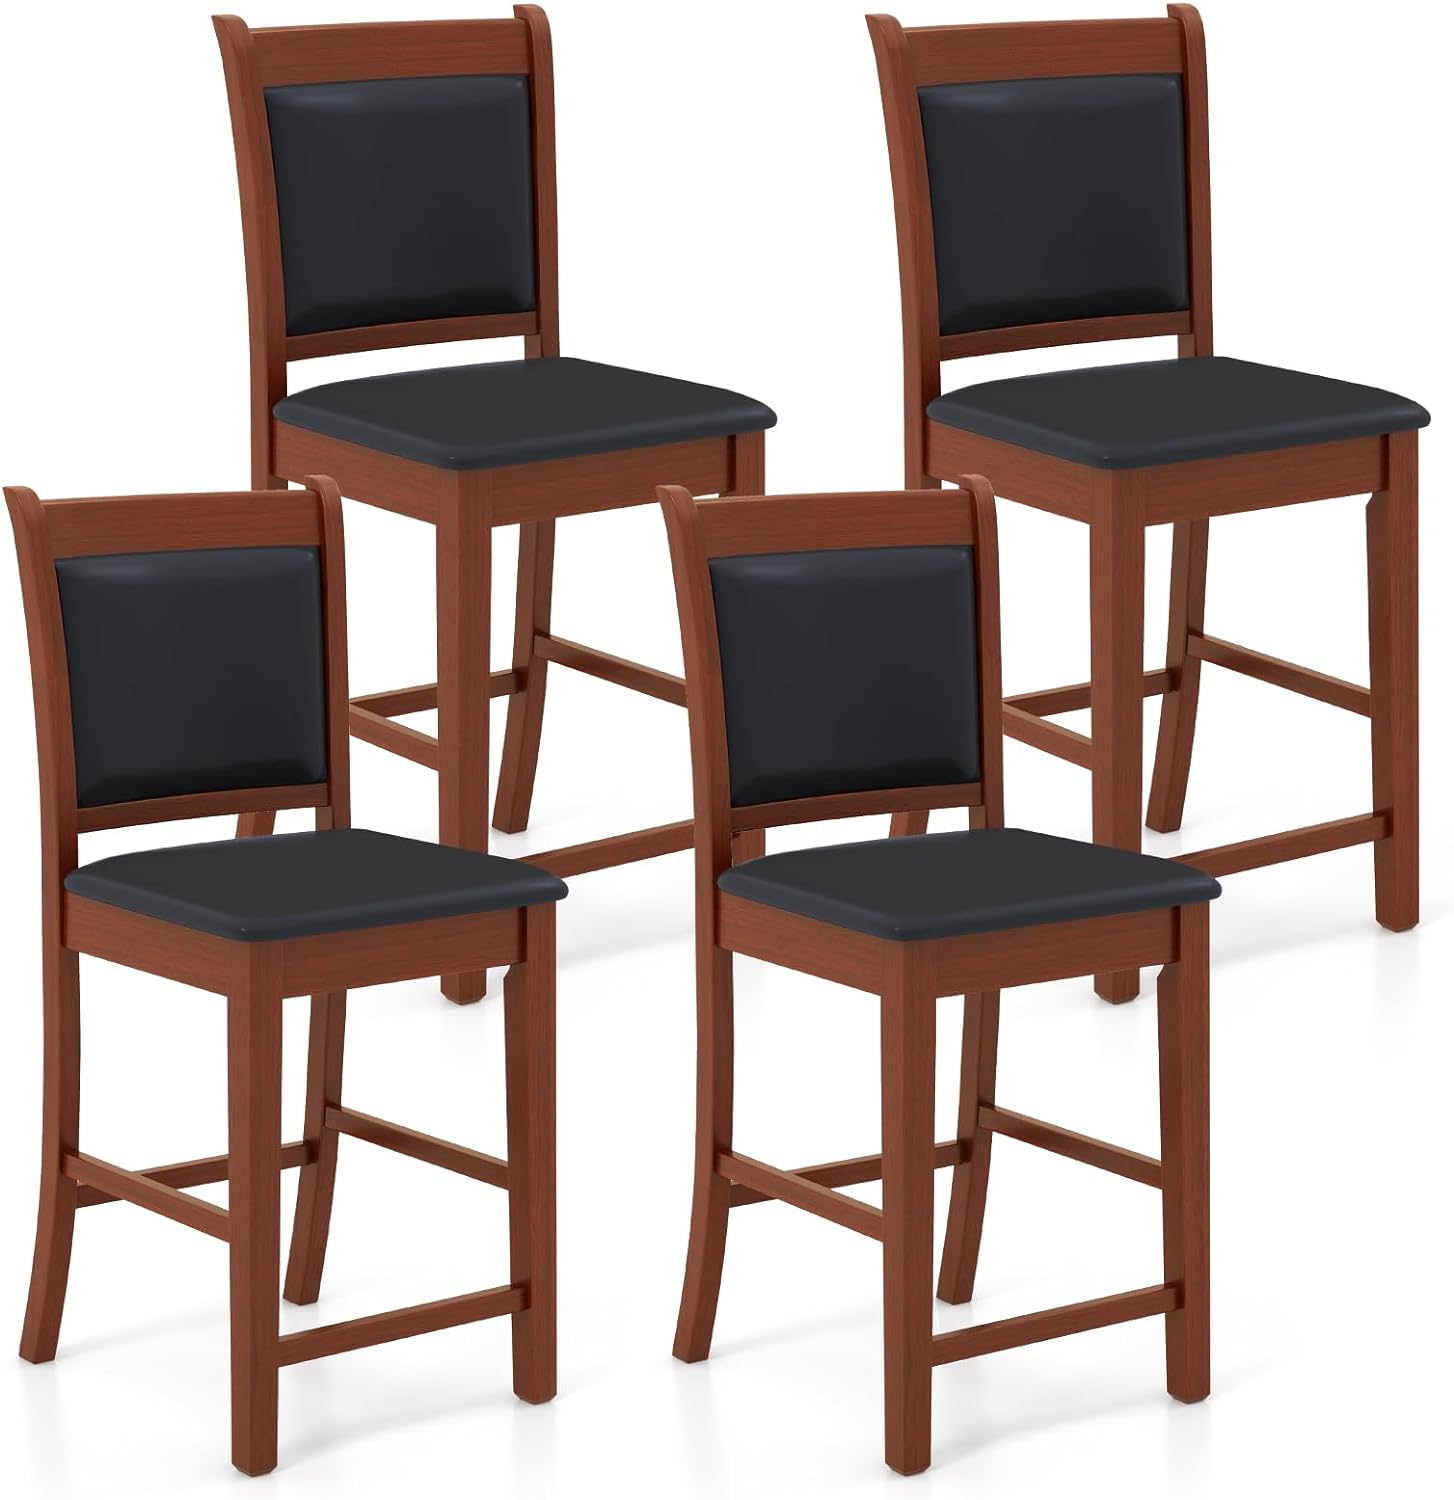 Giantex 24.5" Bar Stools Set of 2, Upholstered Counter Height Bar Stools w/Faux Leather Cushion & Footrest